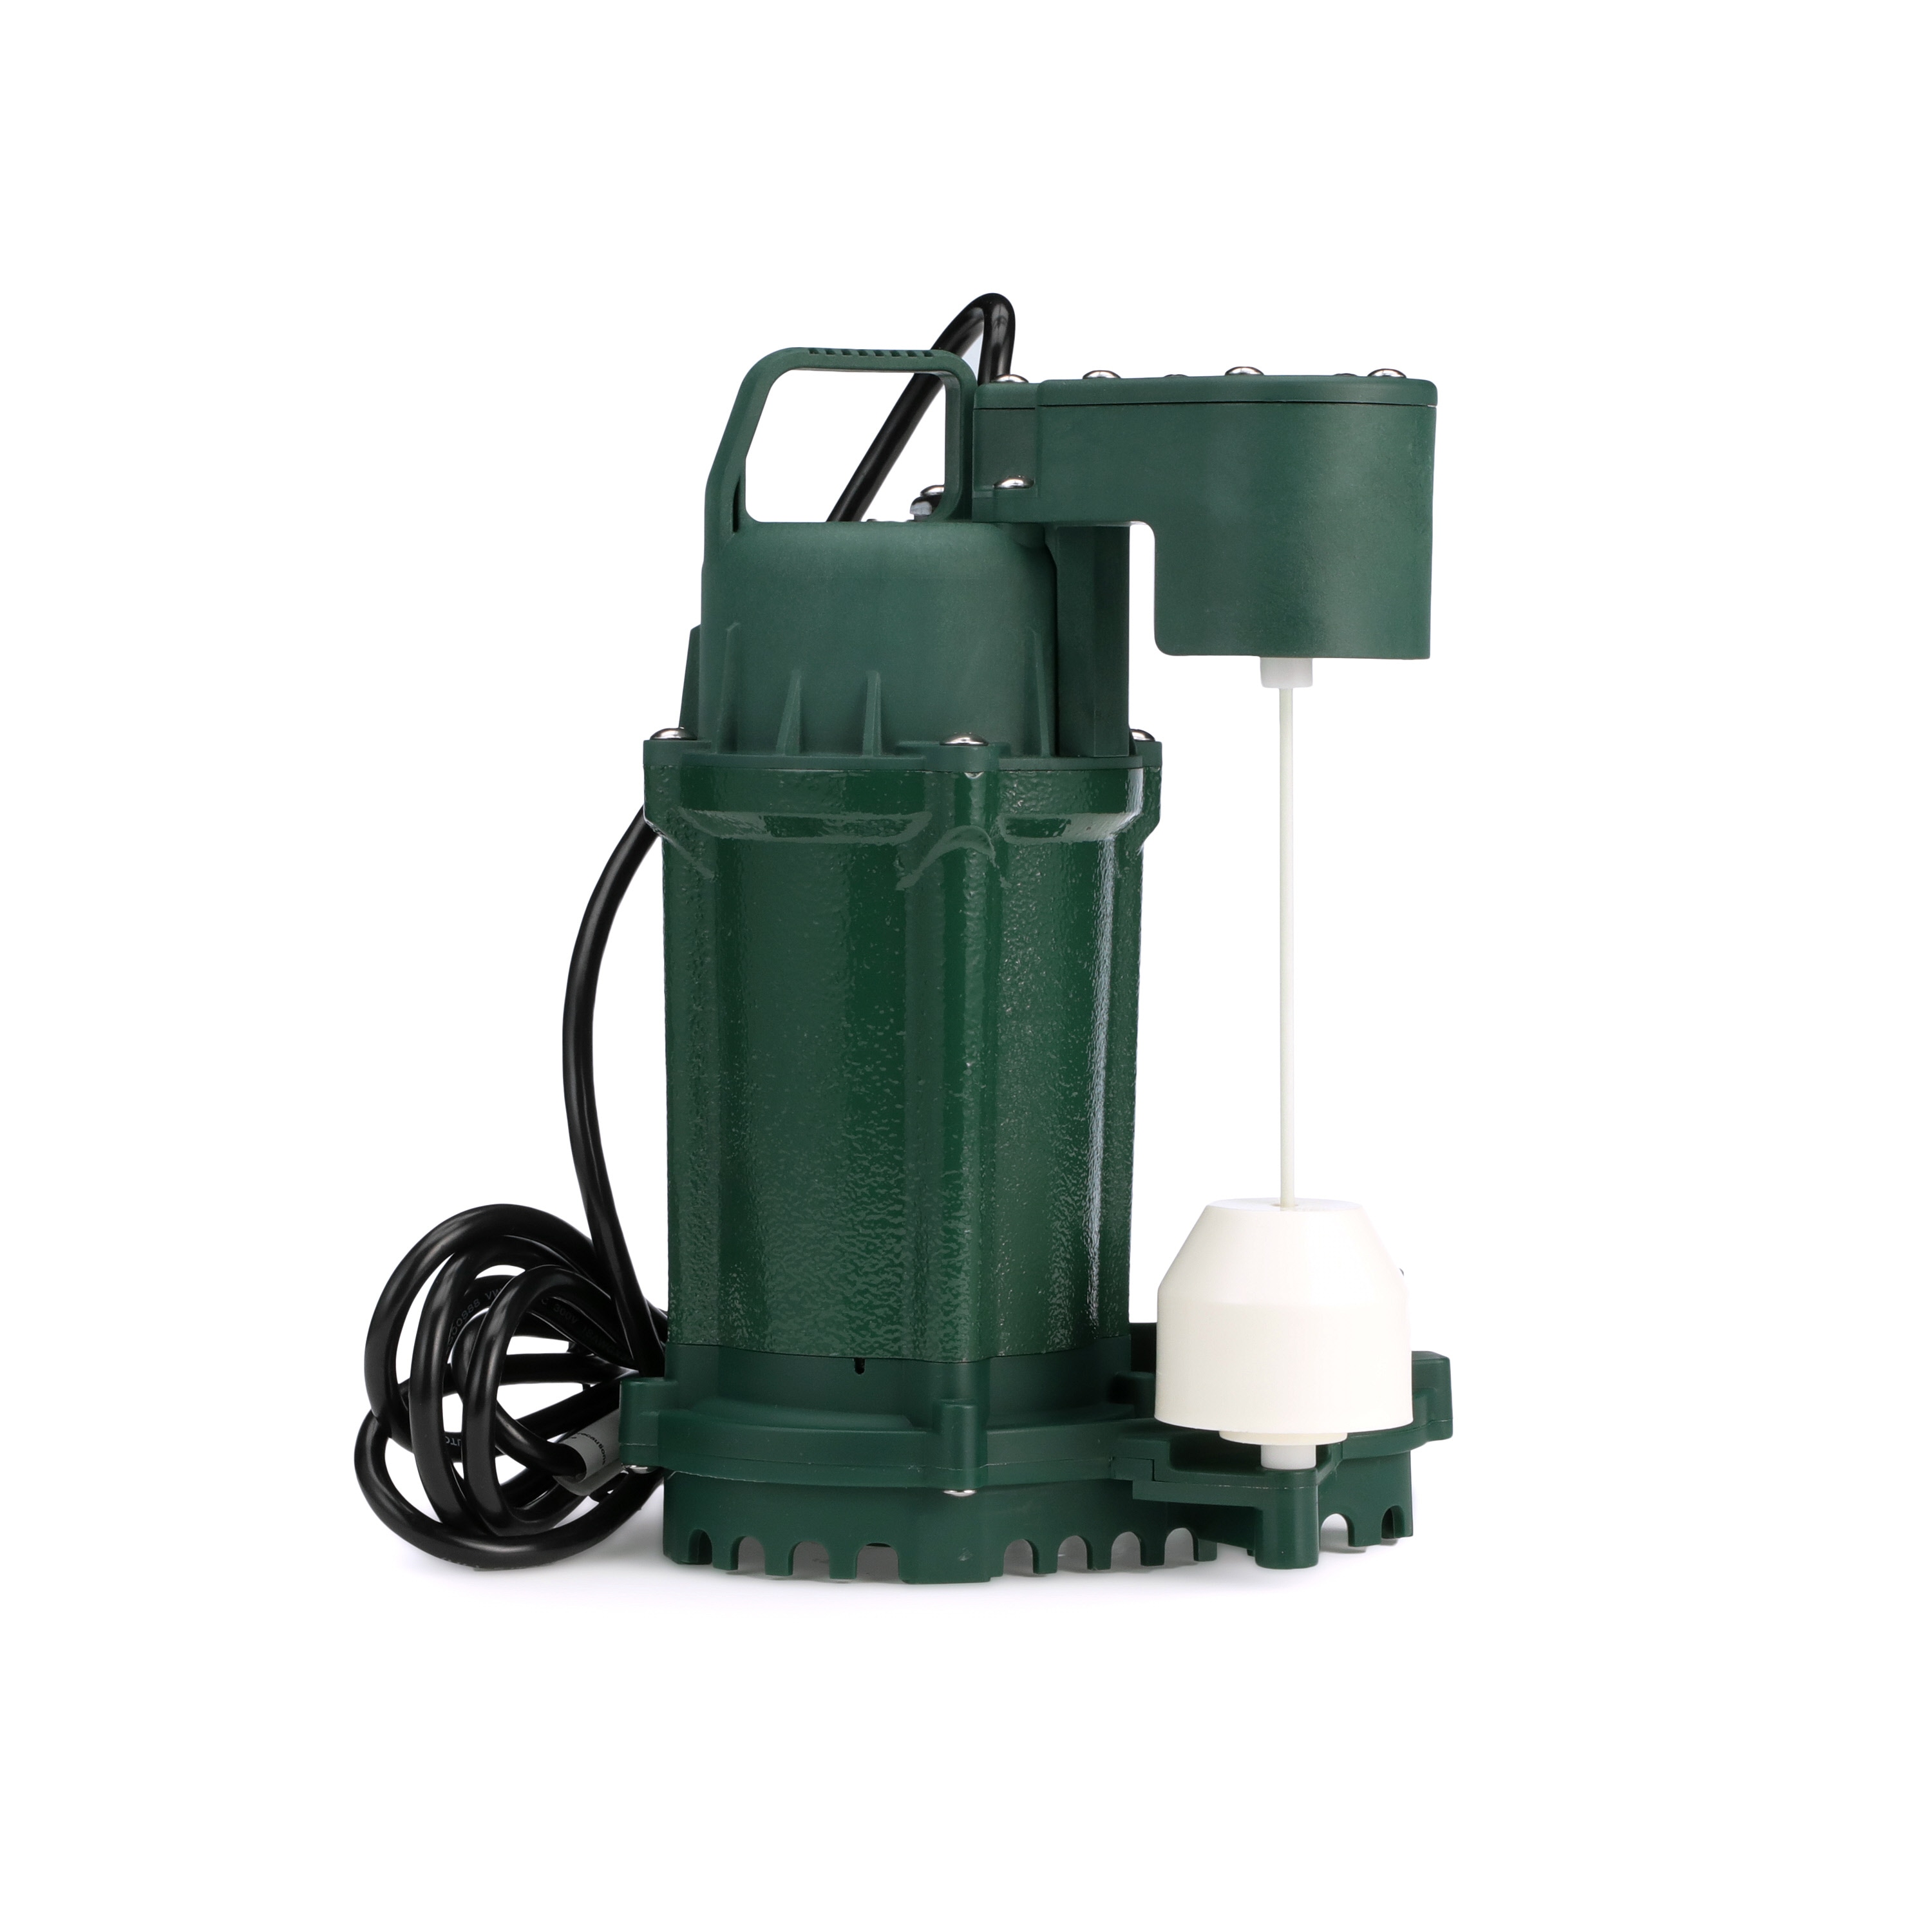 for sale online 1073-0001 Zoeller 1/3 HP Cast Iron Submersible Sump Pump Green 